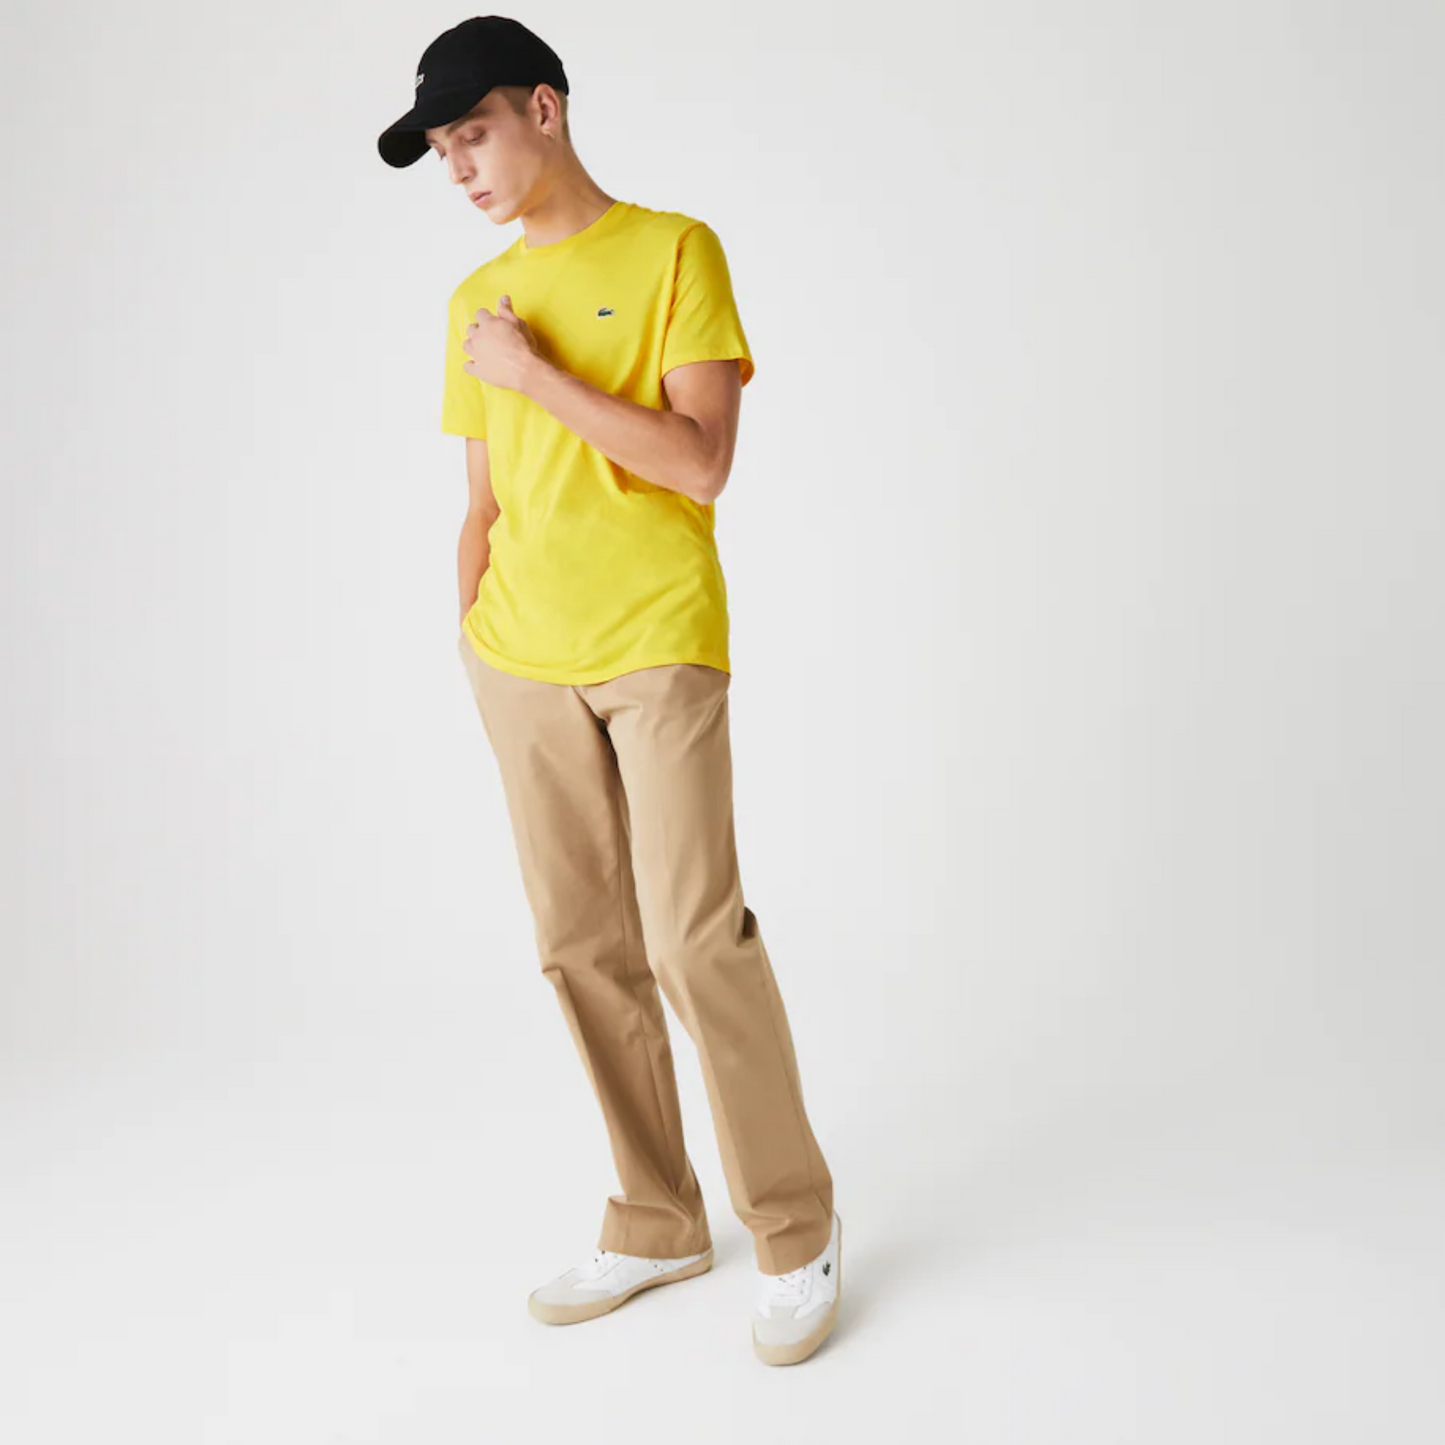 Lacoste Round Neck Small Logo T-Shirt (Yellow） - Shop Streetwear, Sneakers, Slippers and Gifts online | Malaysia - The Factory KL